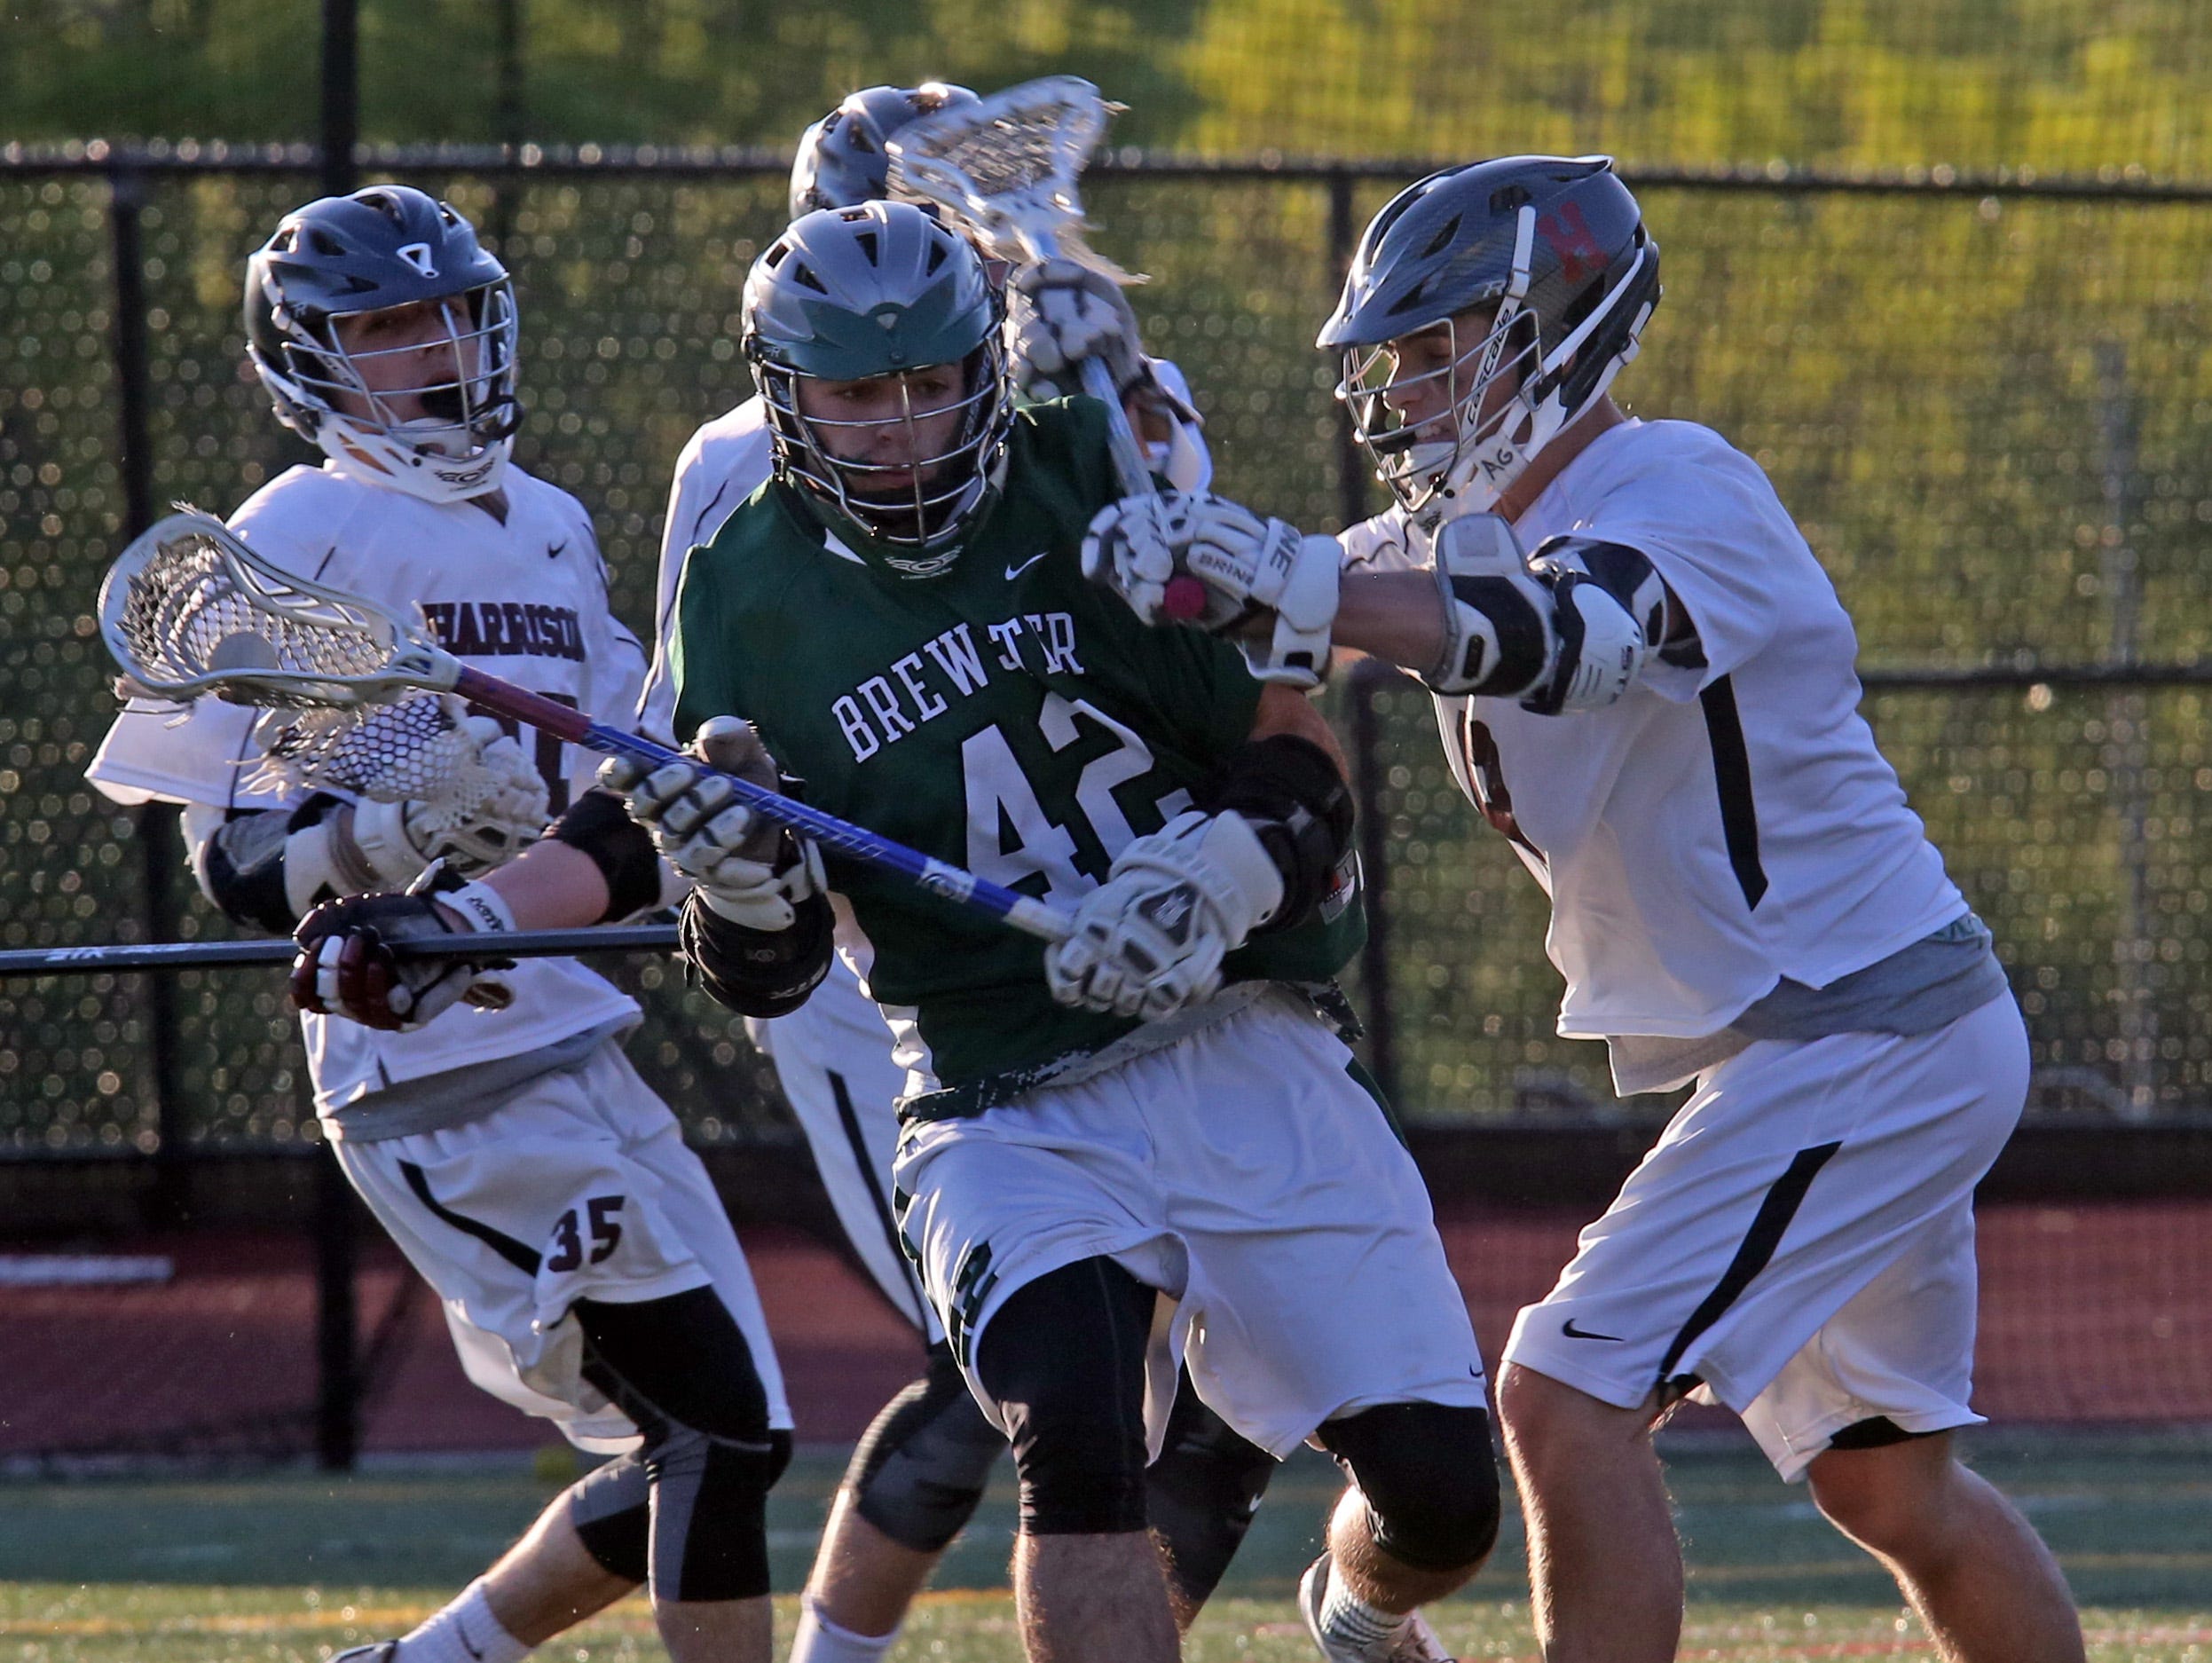 Brewster defeats Harrison 13-12 during boys lacrosse Section 1 Class B playoff game at Harrison High School on May 16, 2016.